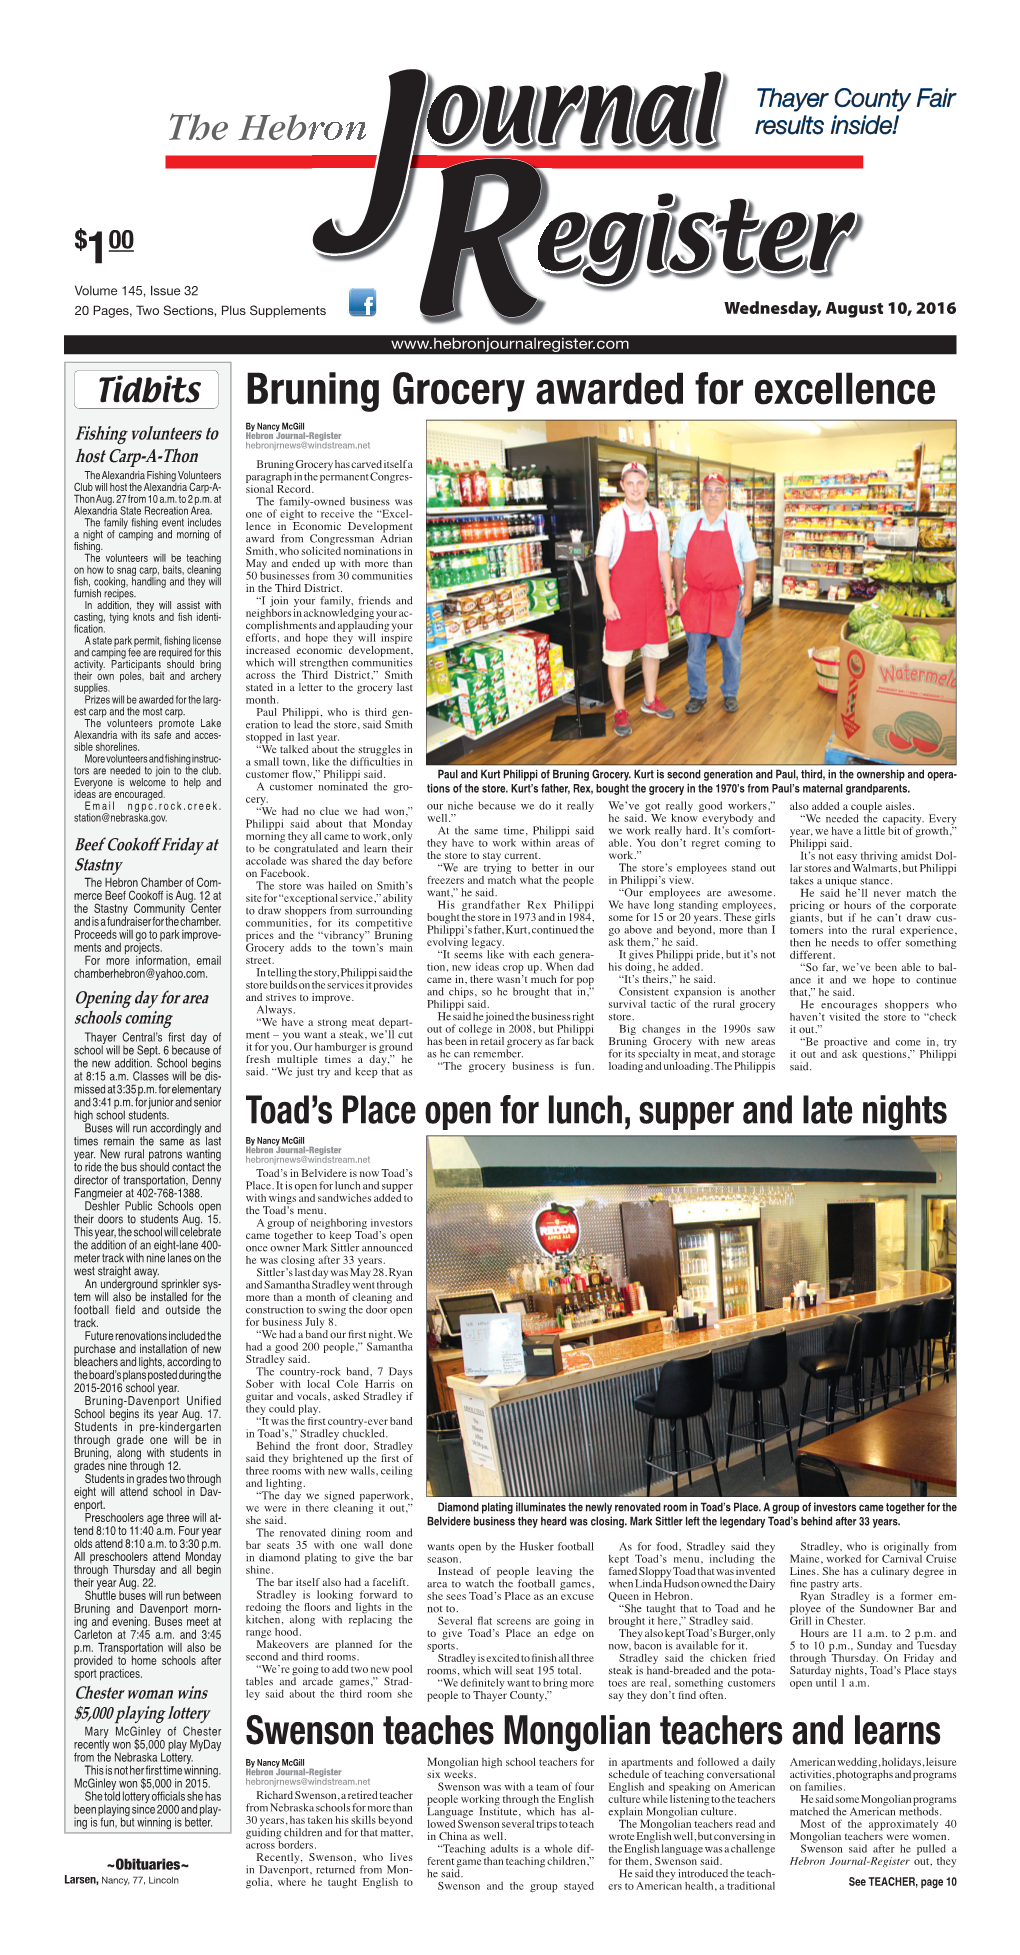 Bruning Grocery Awarded for Excellence